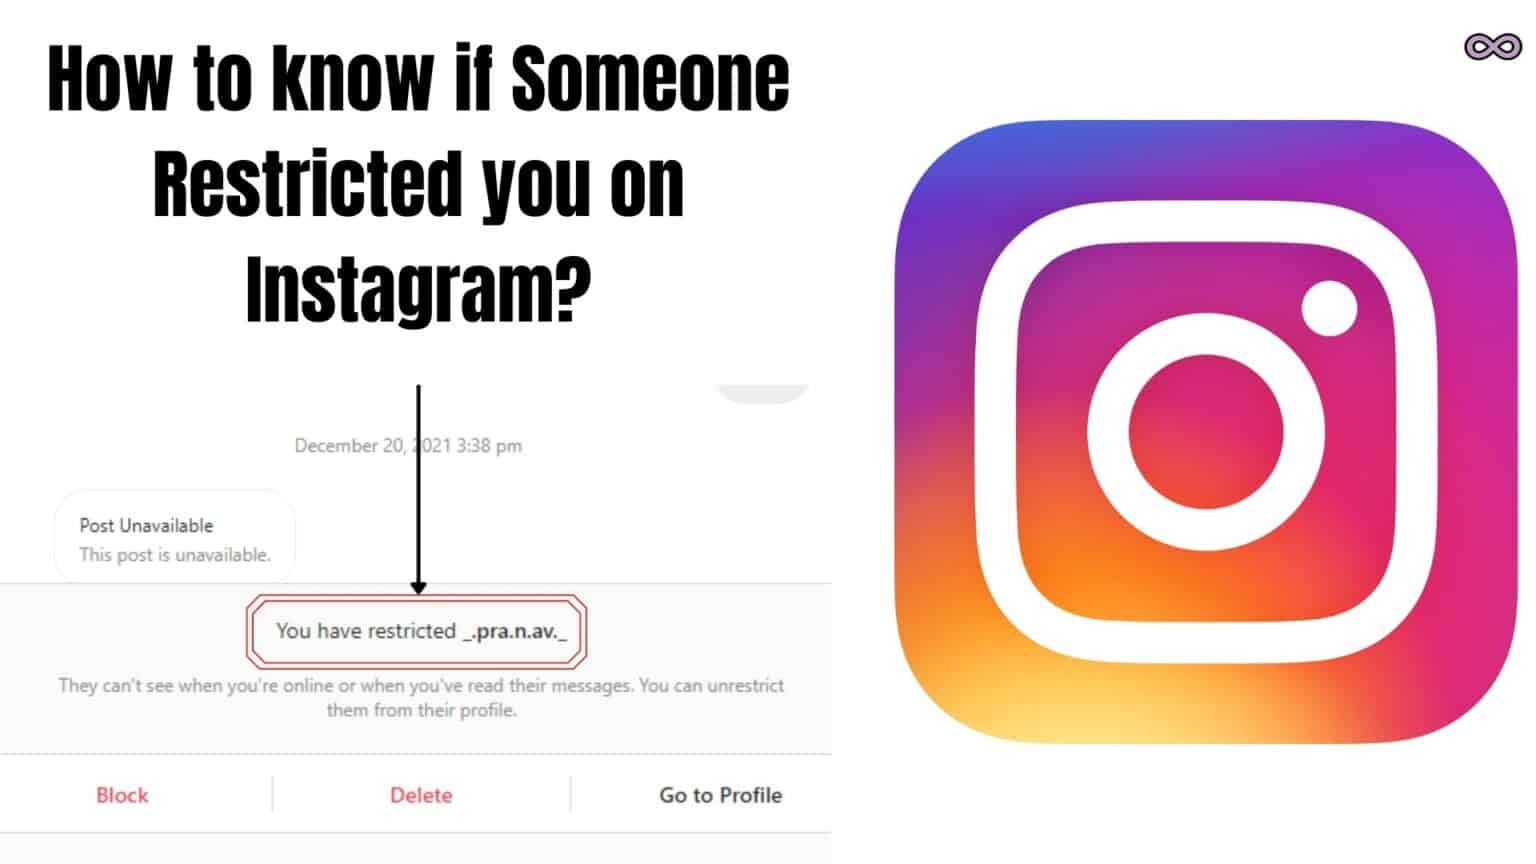 How to know if Someone Restricted you on Instagram?